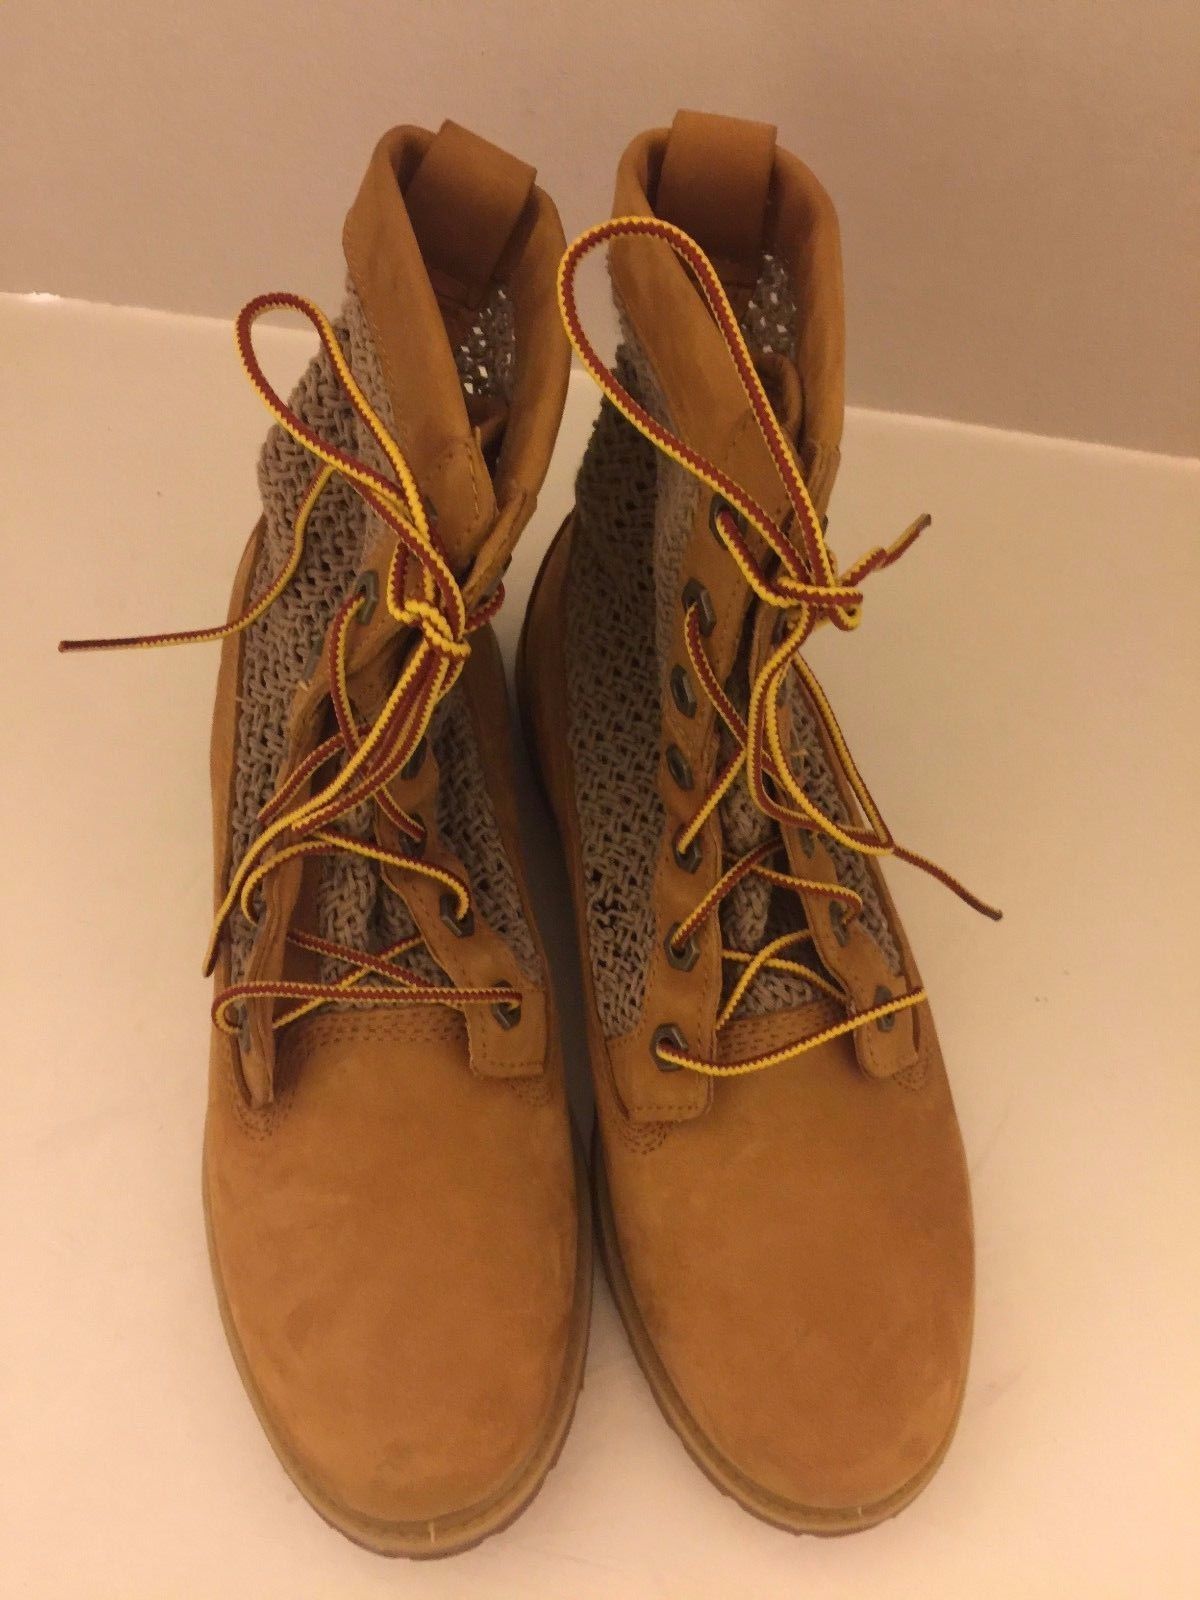 timberland lace up womens boots